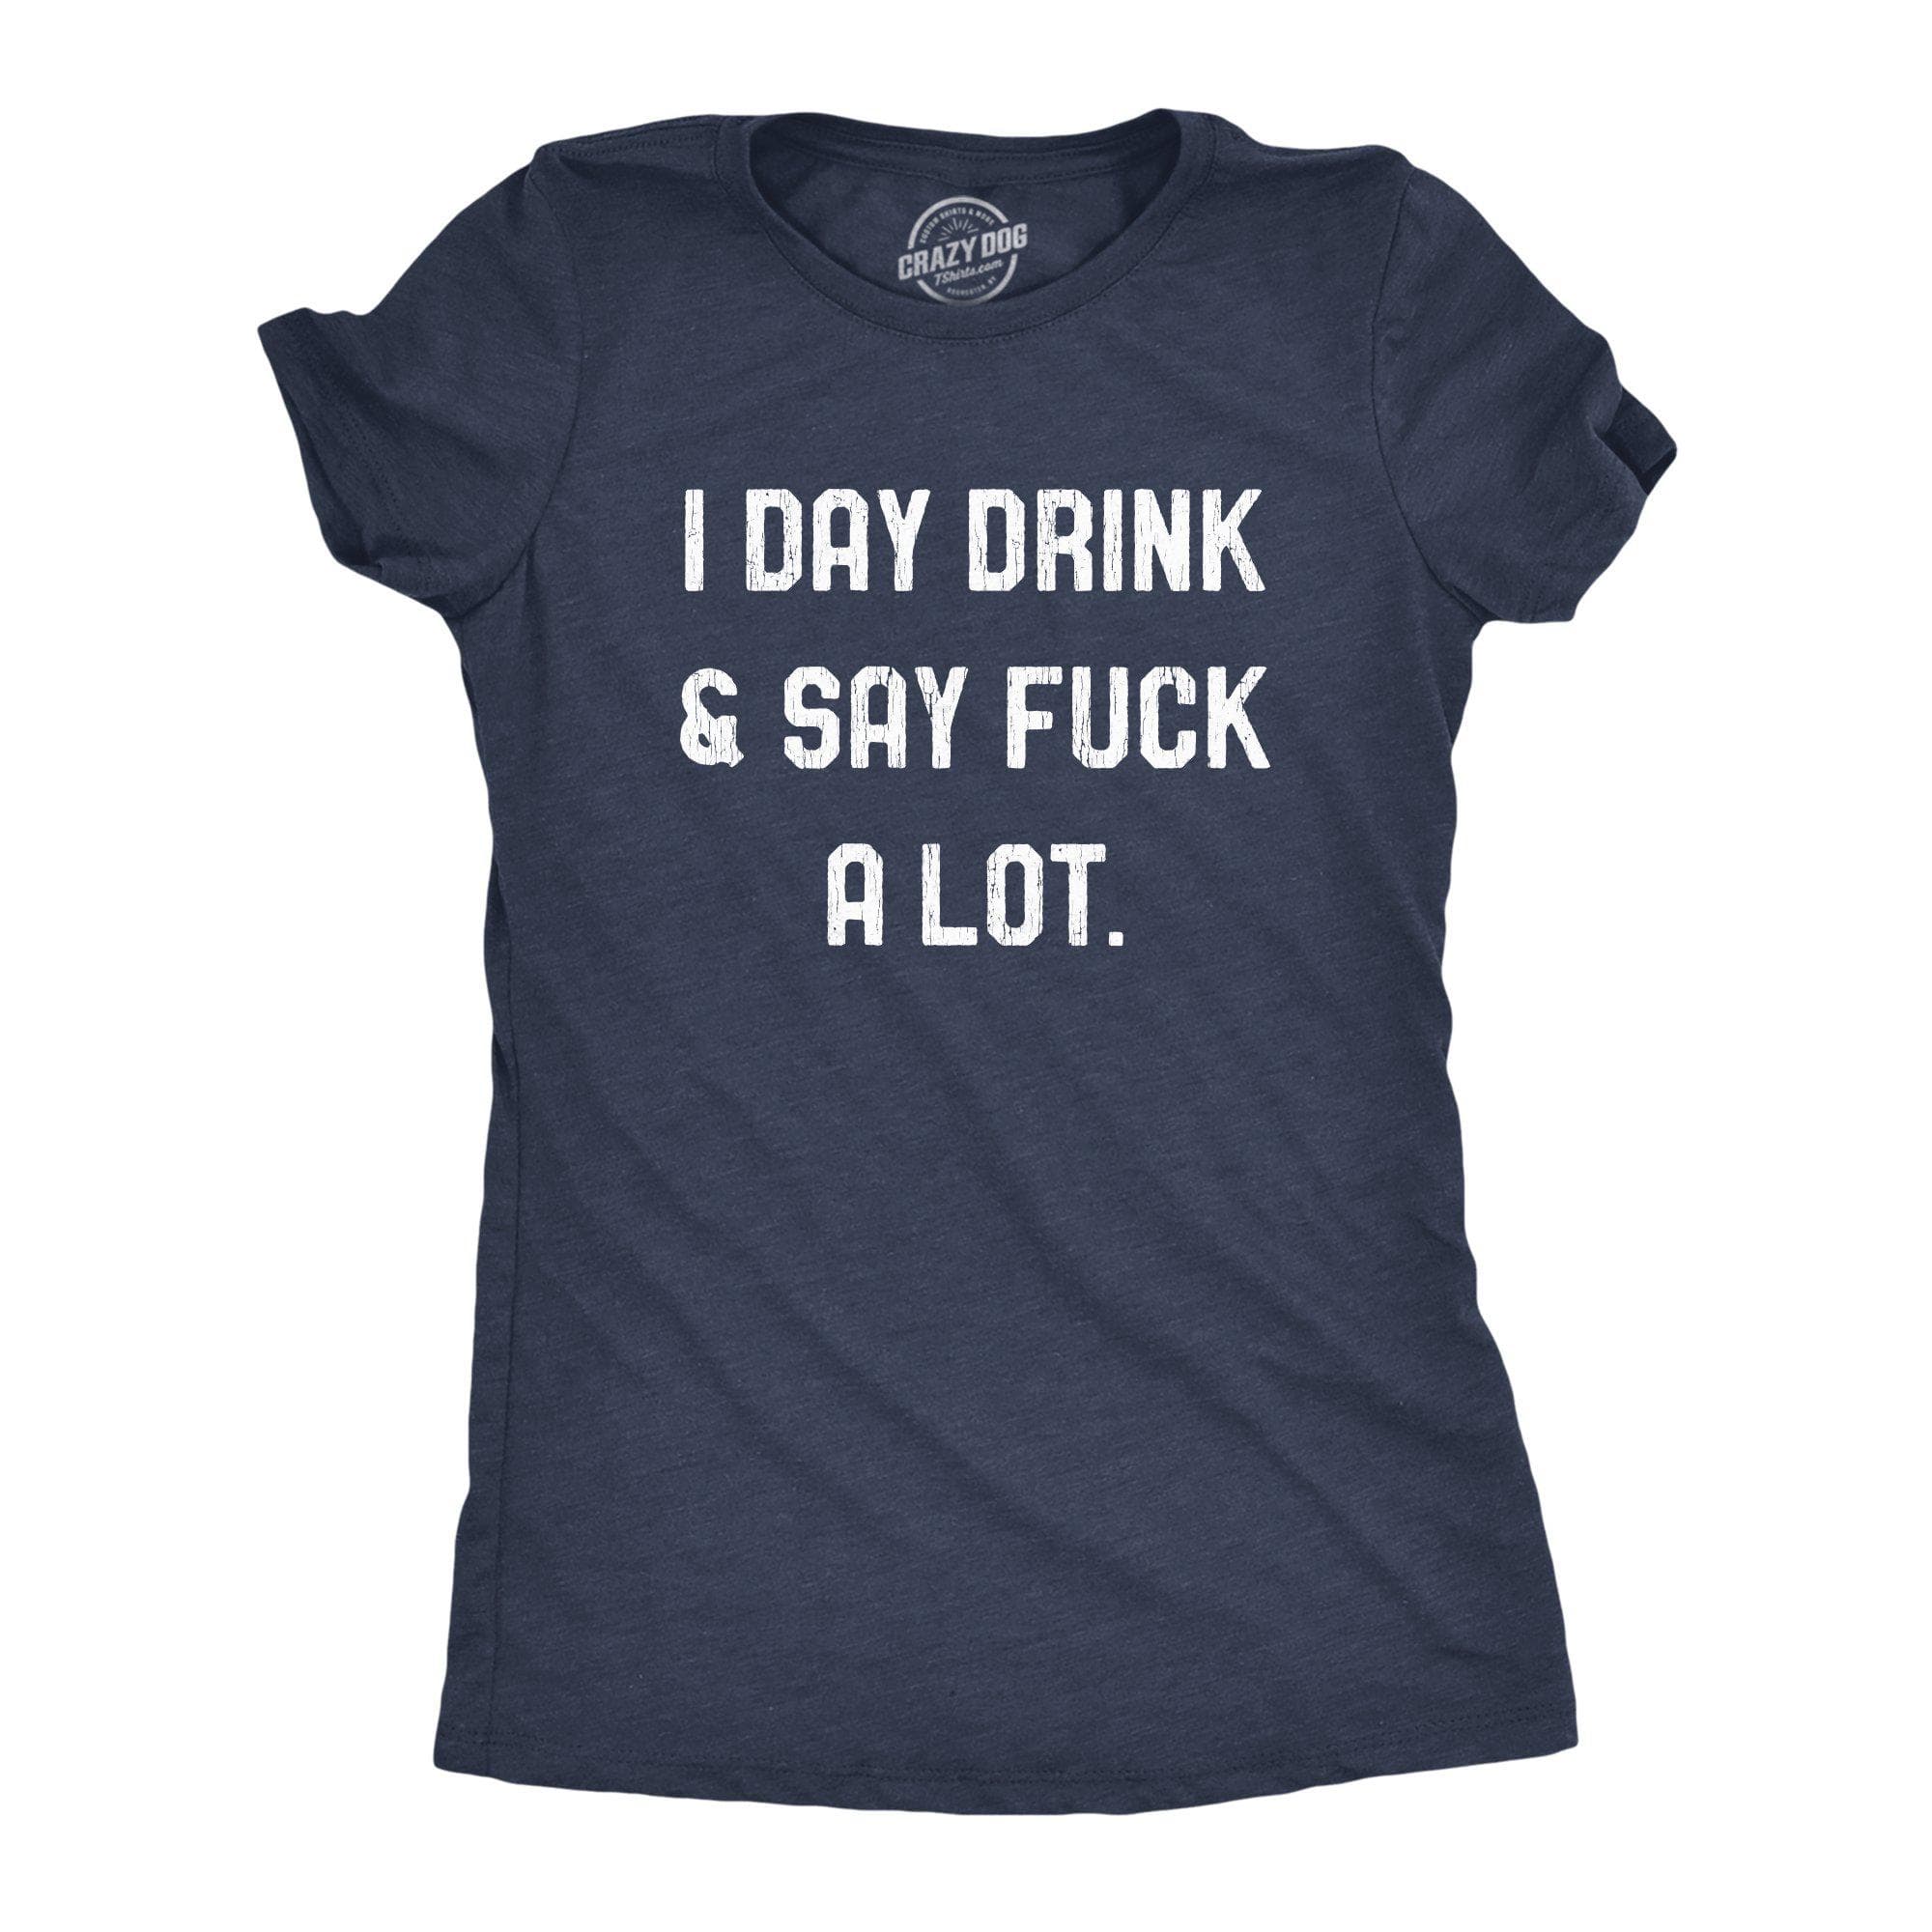 I Day Drink And Say Fuck A Lot Women's Tshirt - Crazy Dog T-Shirts